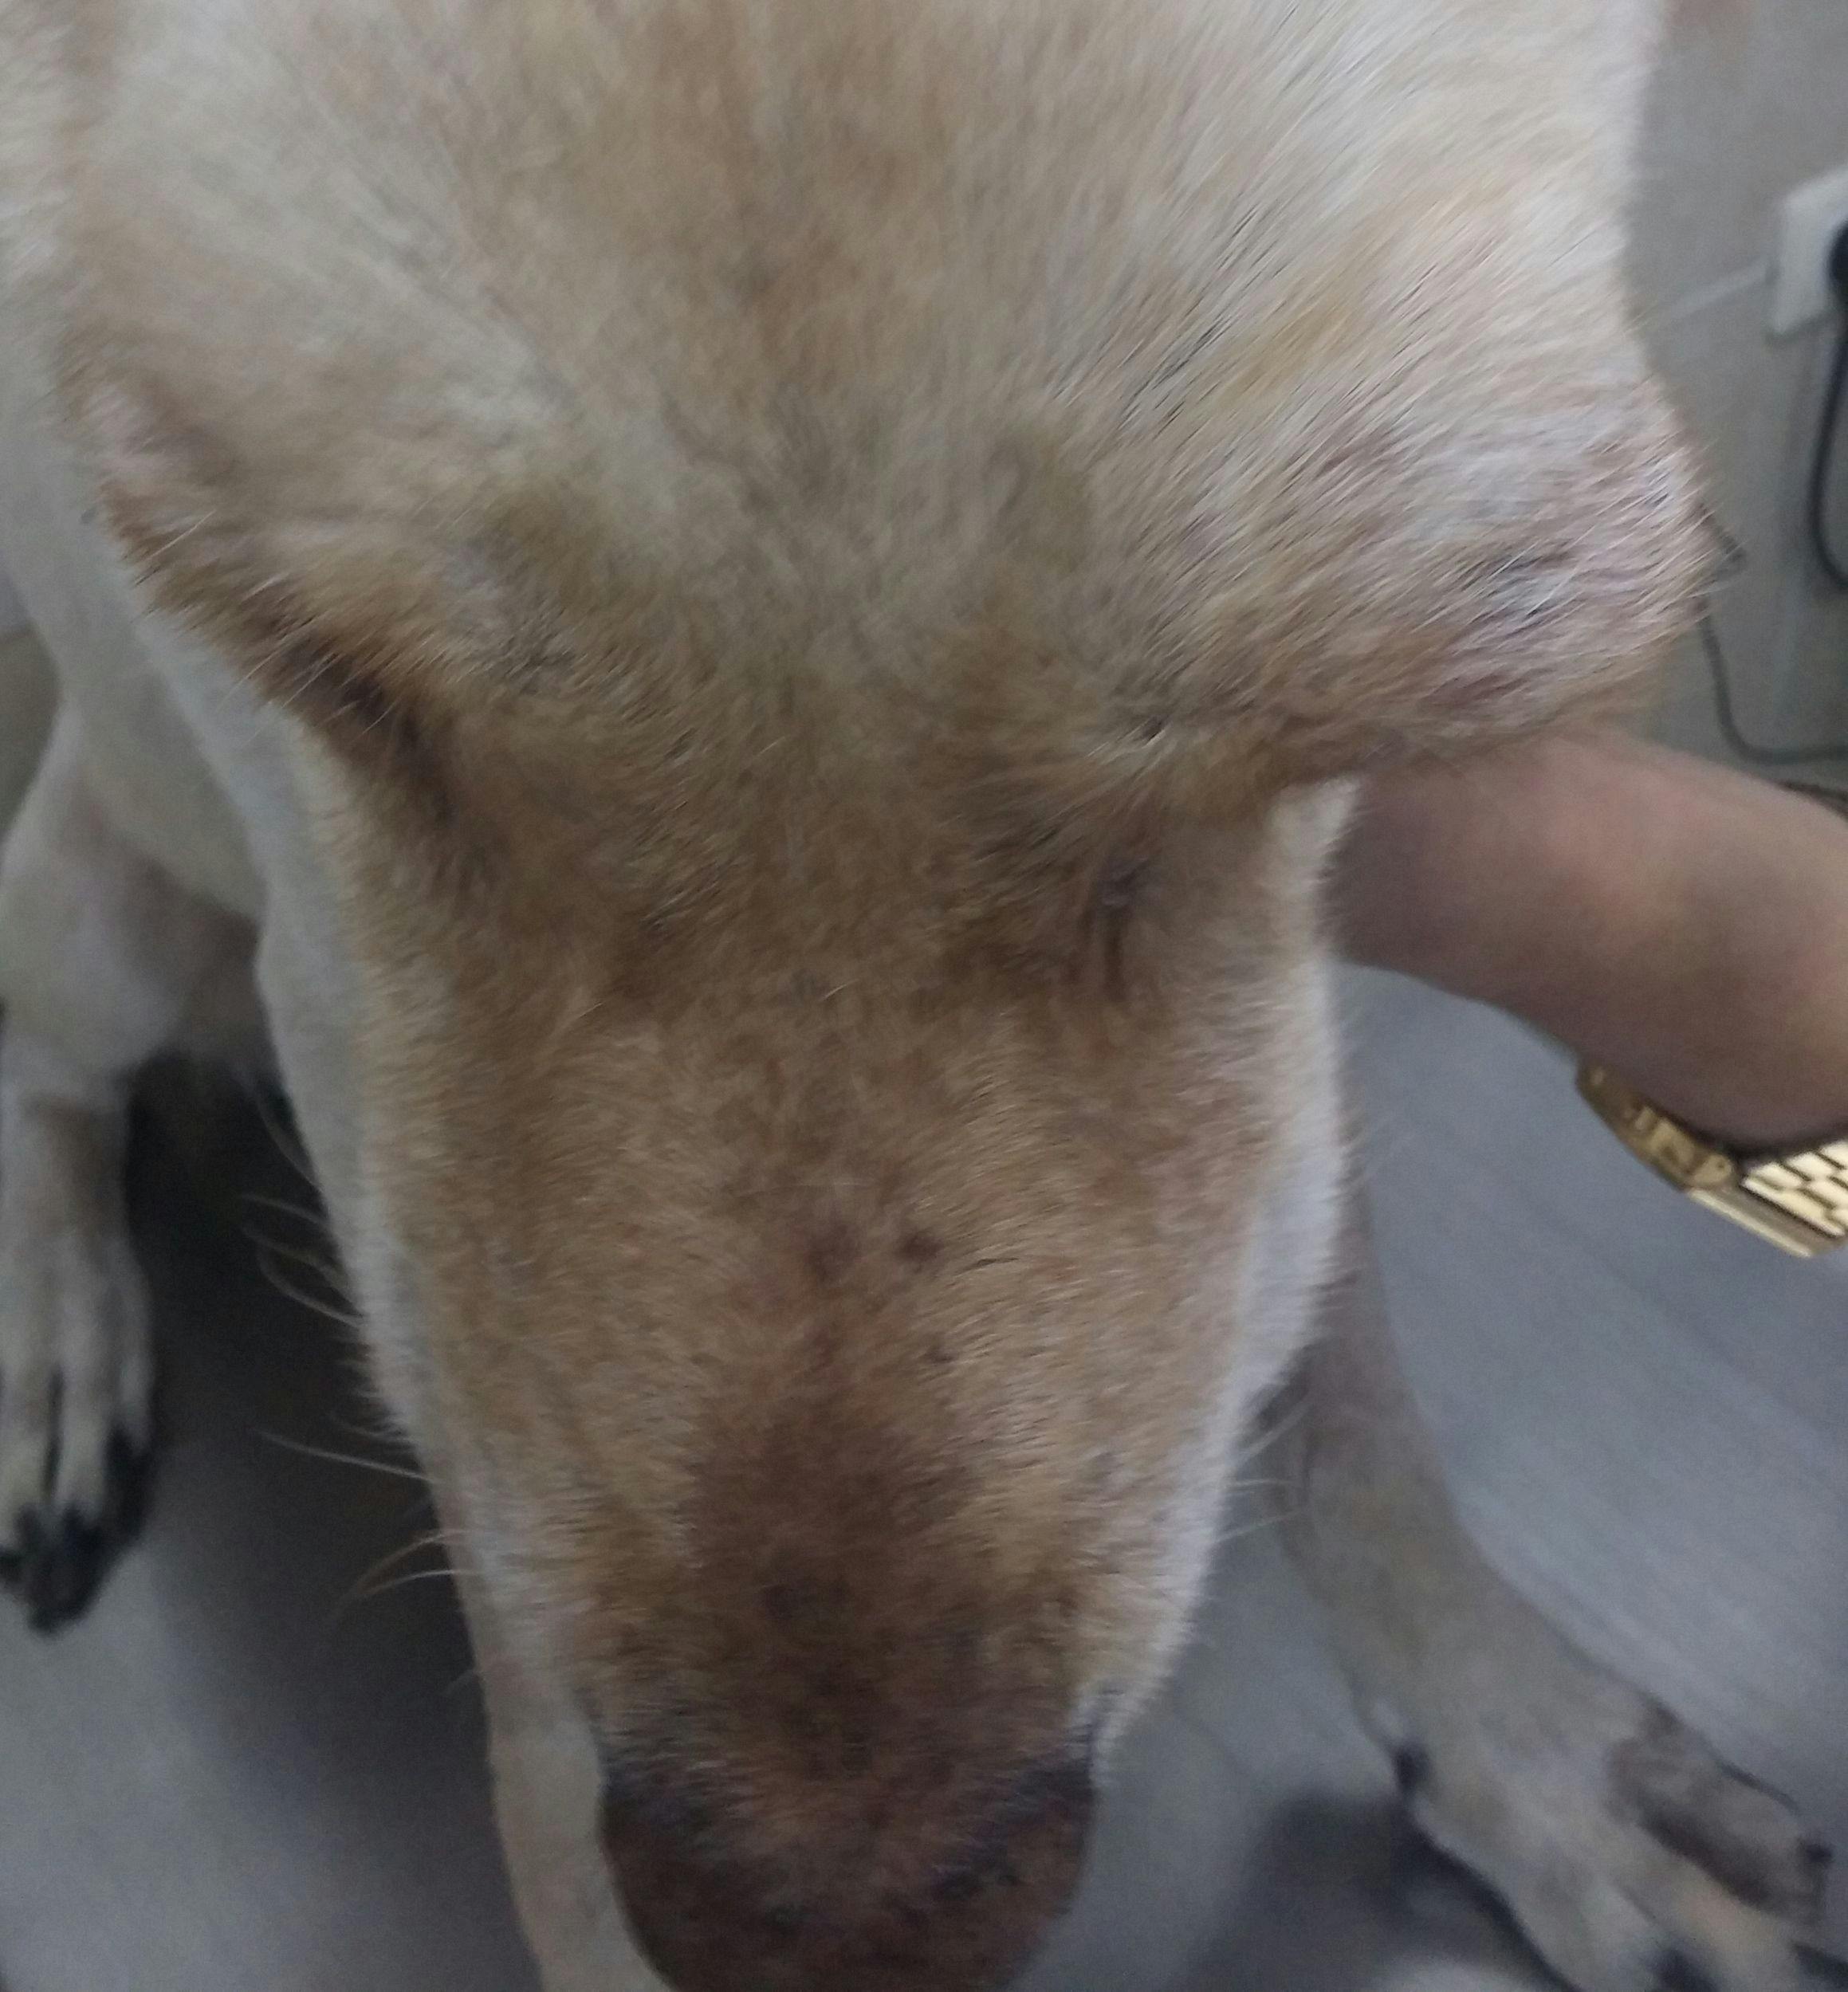 Figure 1. Exophthalmos, or forward displacement, of the left eye in this dog is caused by a retrobulbar abscess.